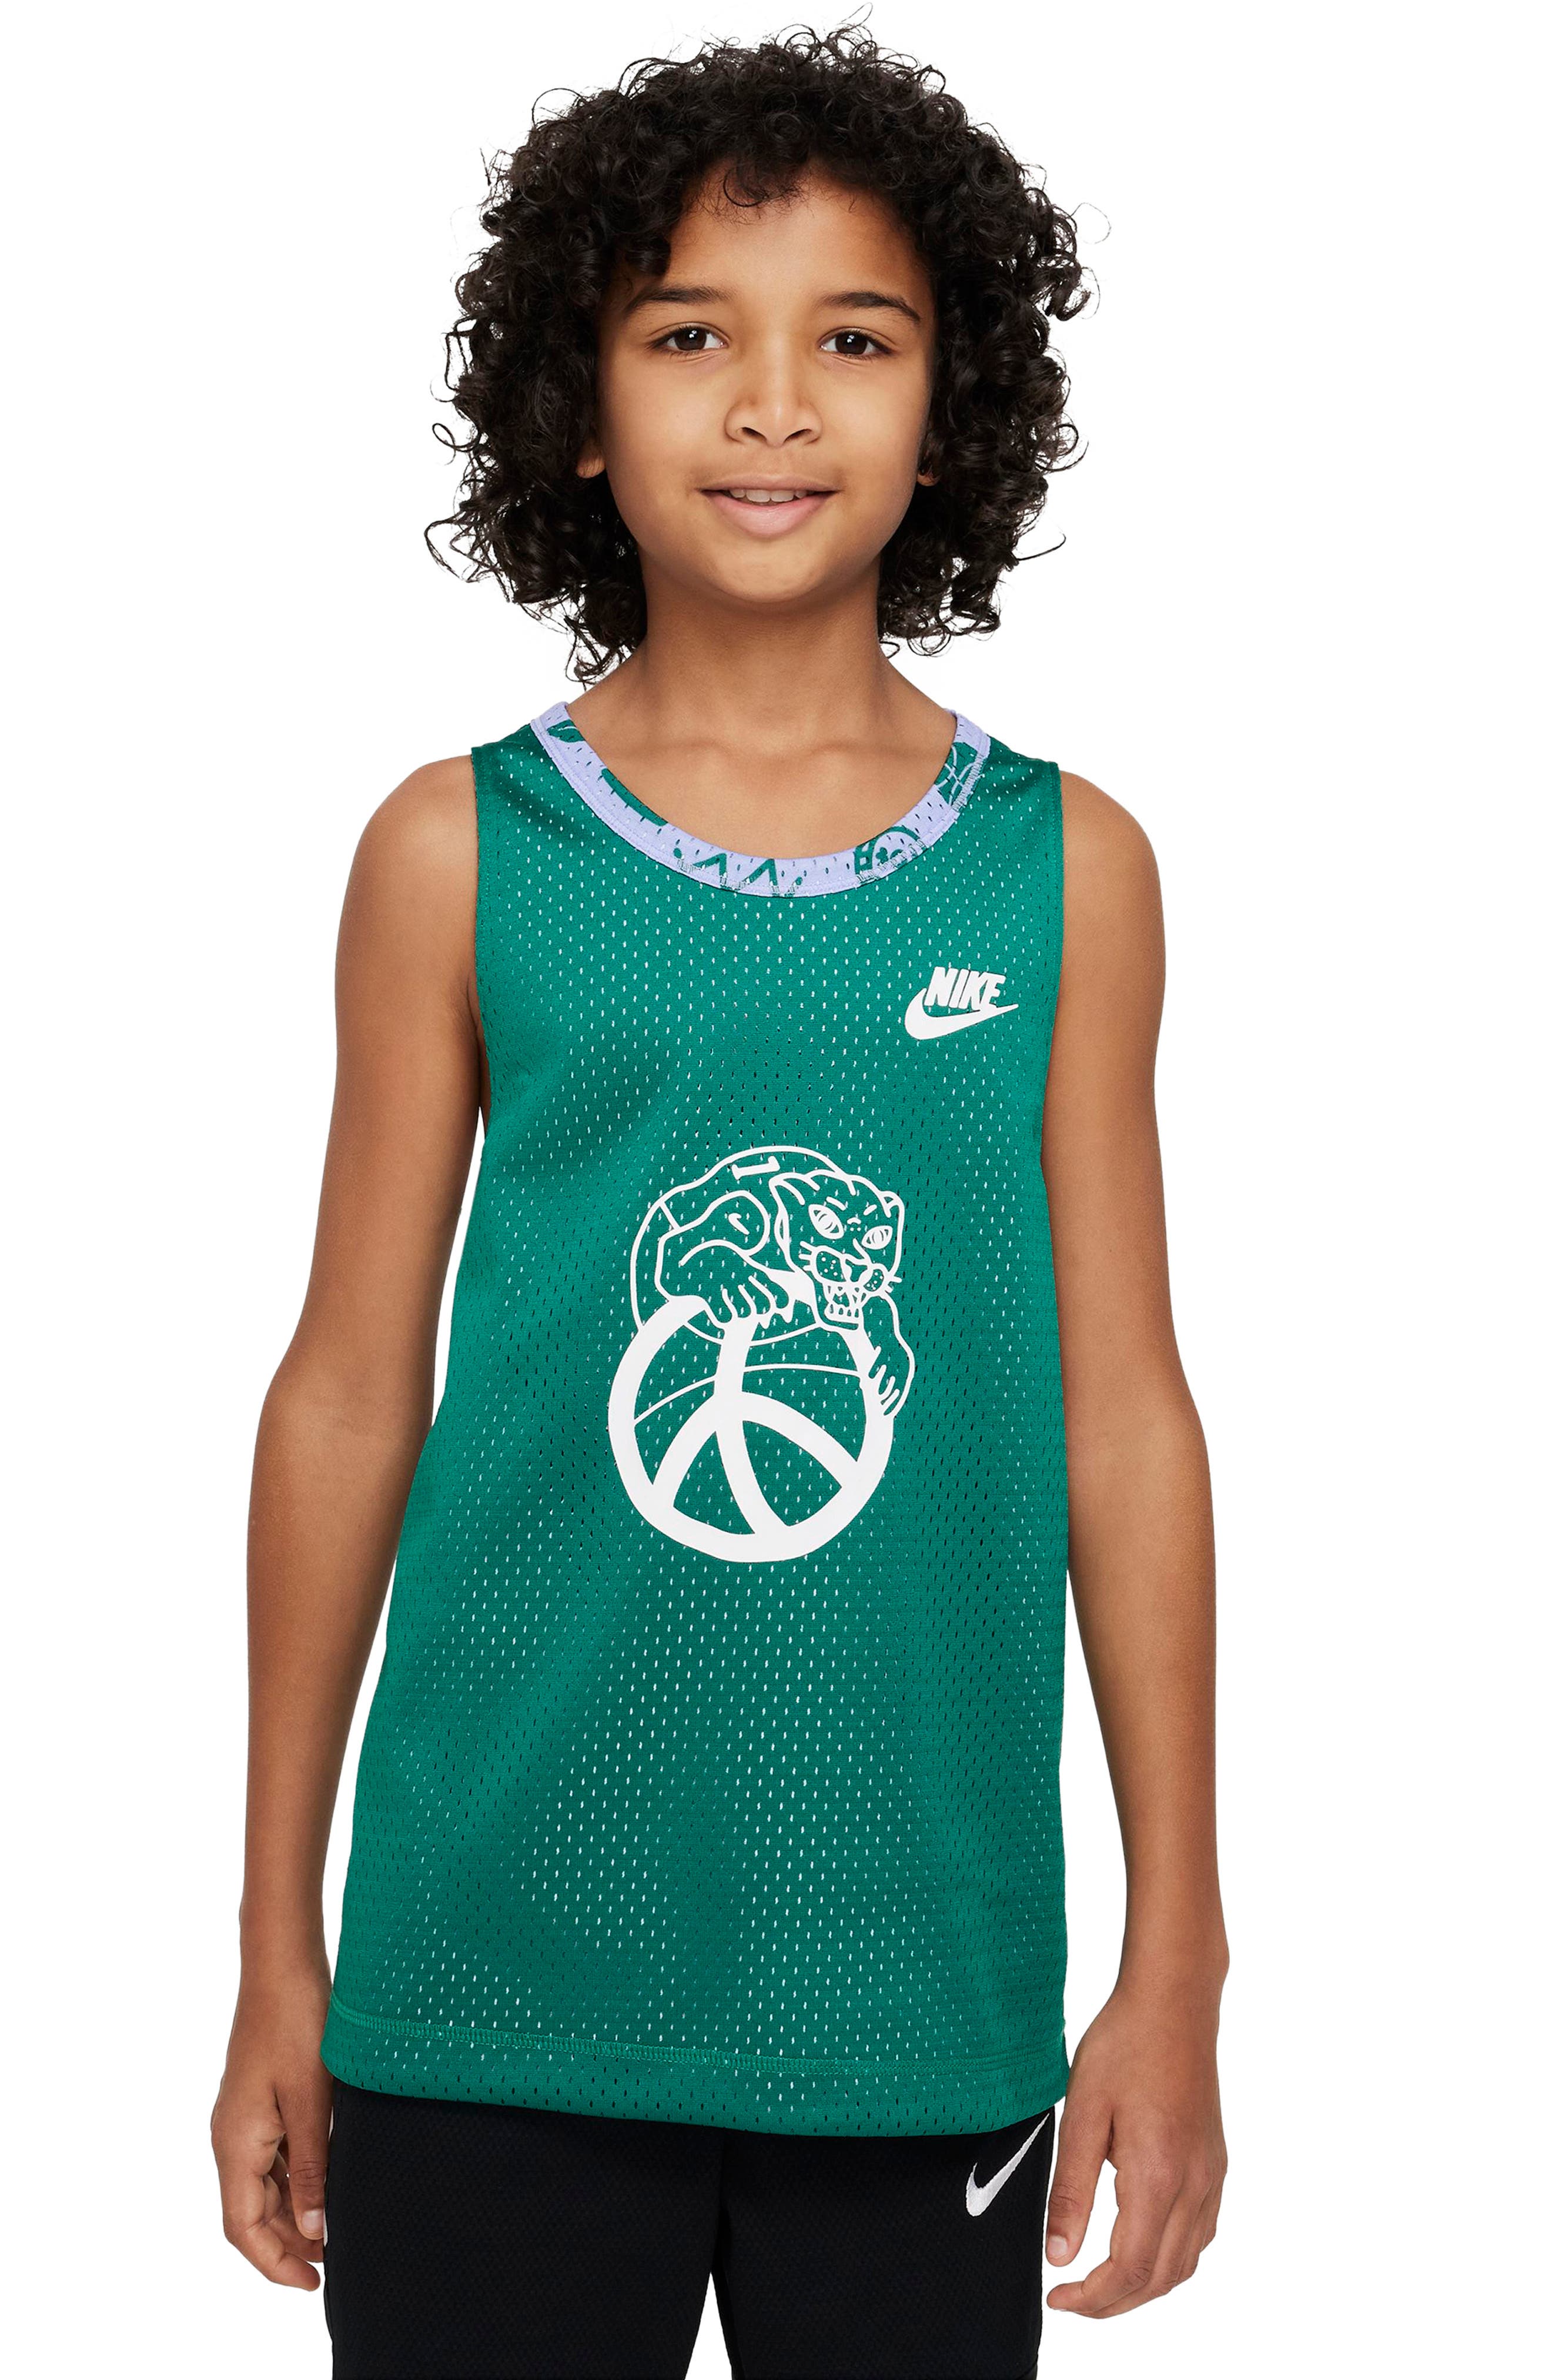 The Boy Cotton Tank in Peace Green at Nordstrom Nordstrom Boys Clothing Tops Tank Tops 